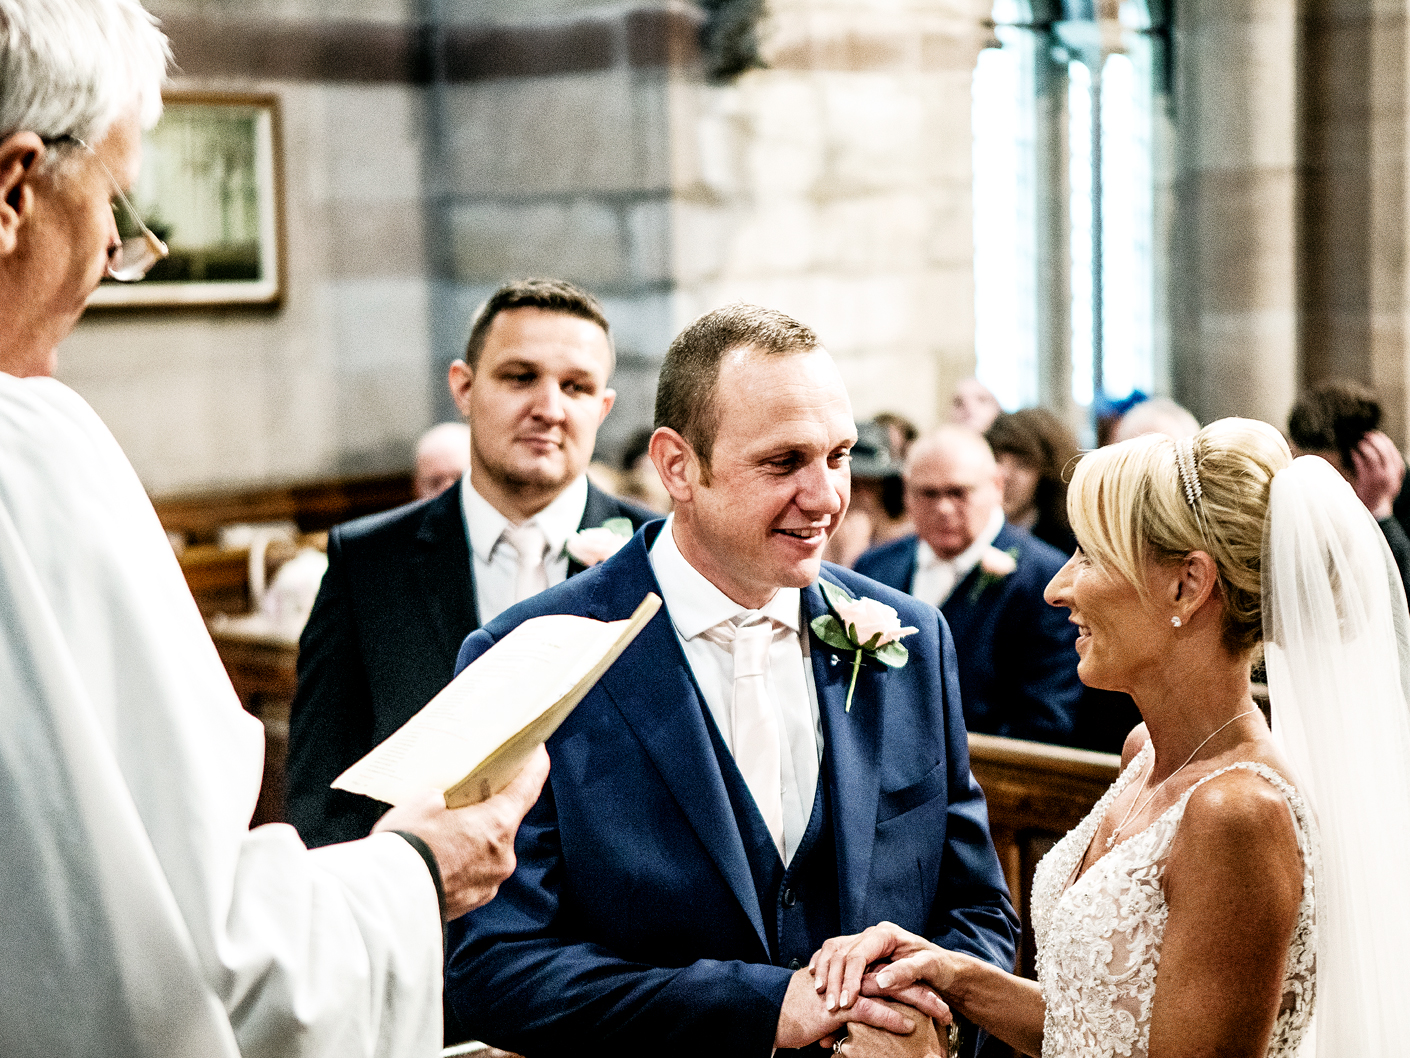 image-or-the-wedding-ceremony-in-the-wirral-cheshire